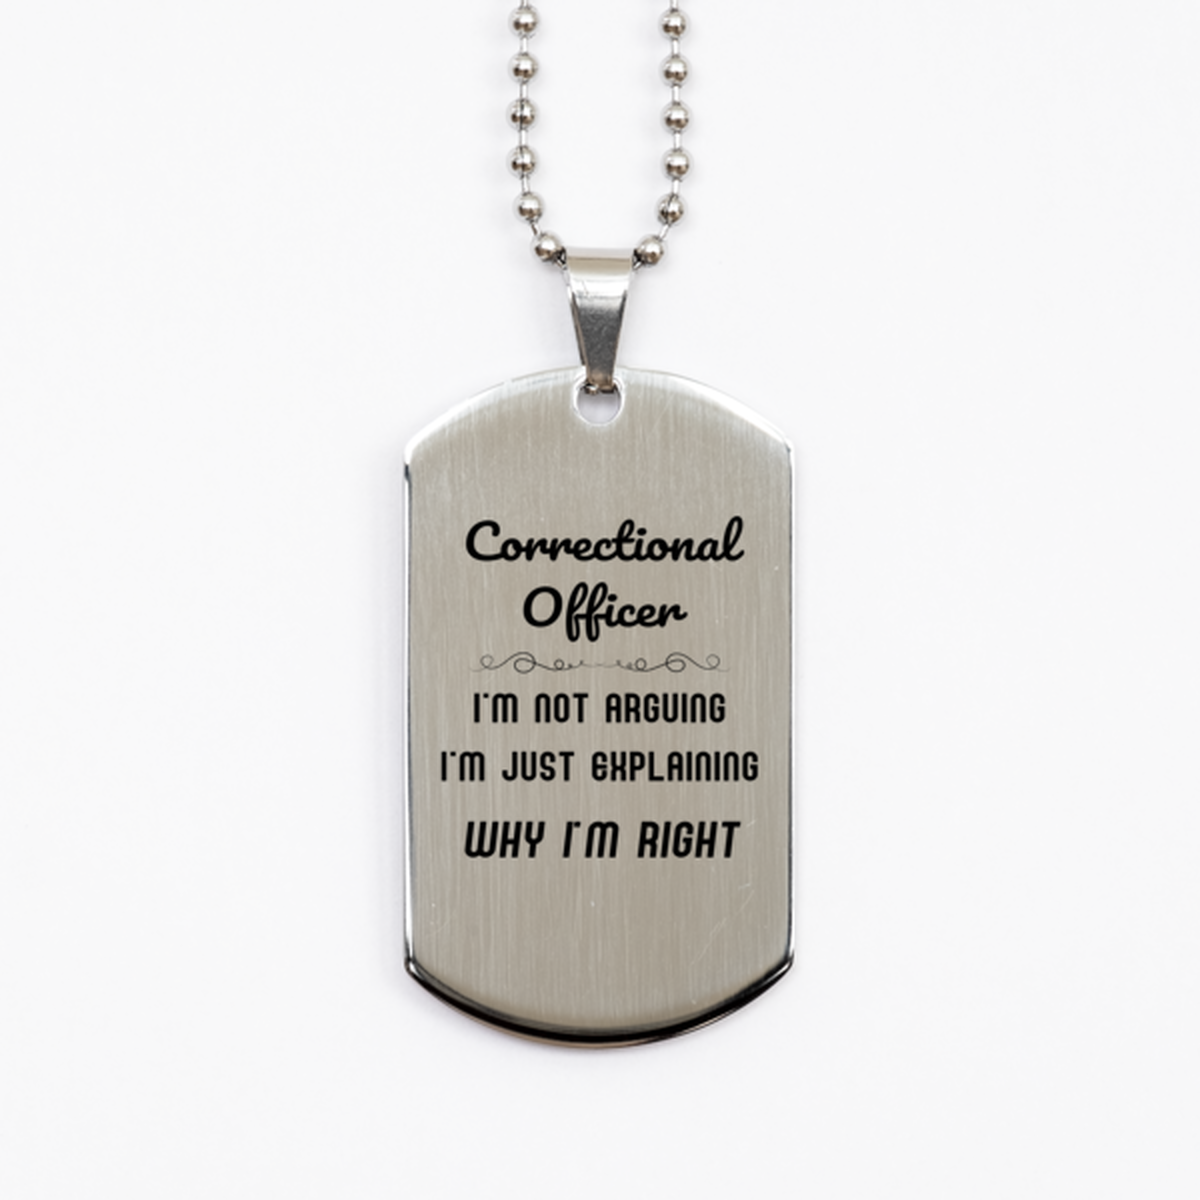 Correctional Officer I'm not Arguing. I'm Just Explaining Why I'm RIGHT Silver Dog Tag, Funny Saying Quote Correctional Officer Gifts For Correctional Officer Graduation Birthday Christmas Gifts for Men Women Coworker